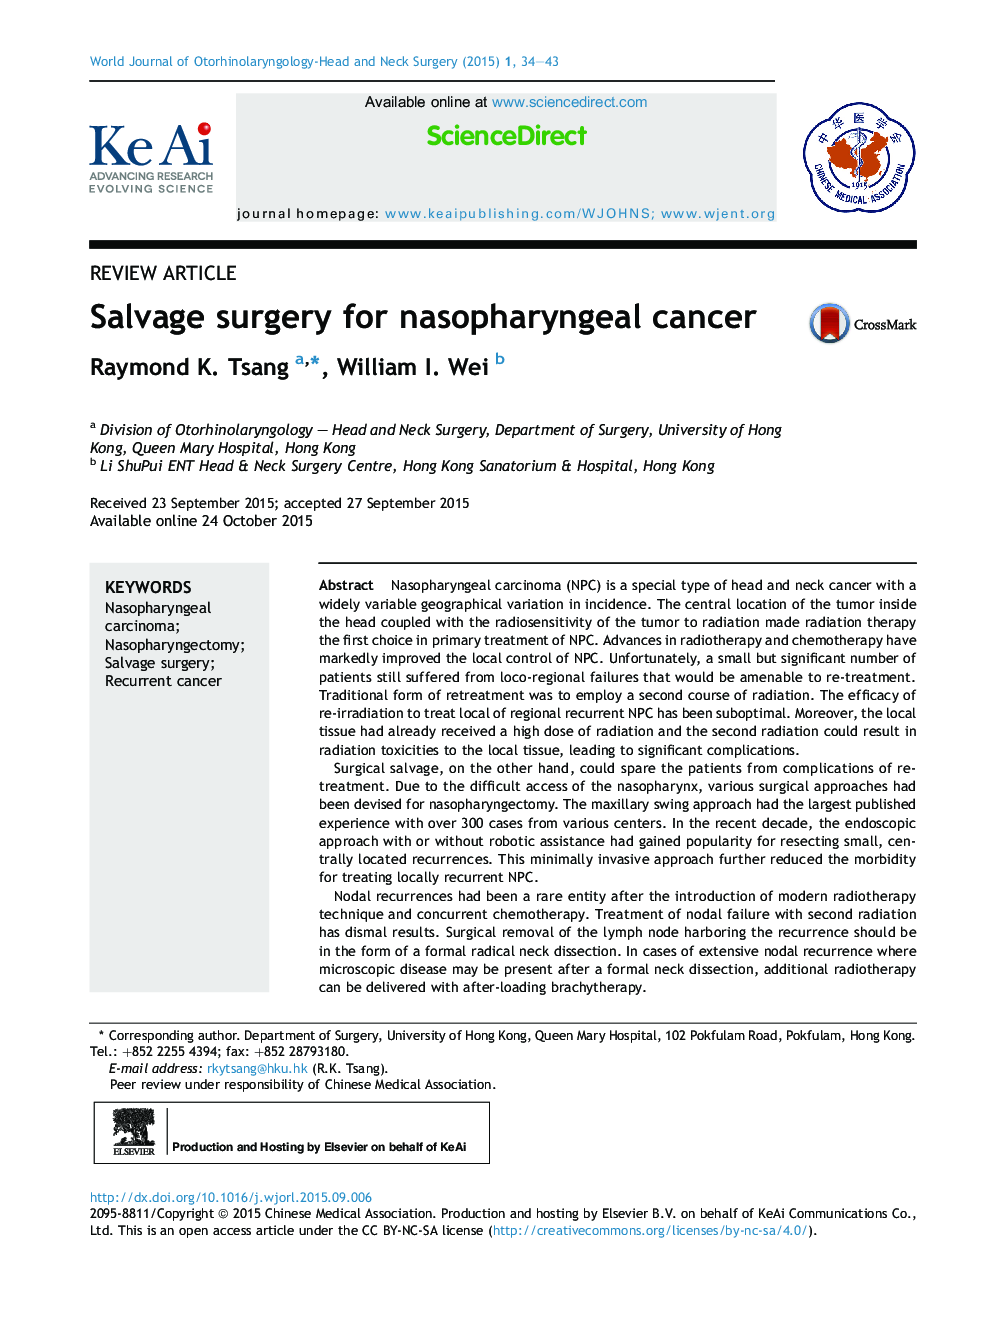 Salvage surgery for nasopharyngeal cancer 